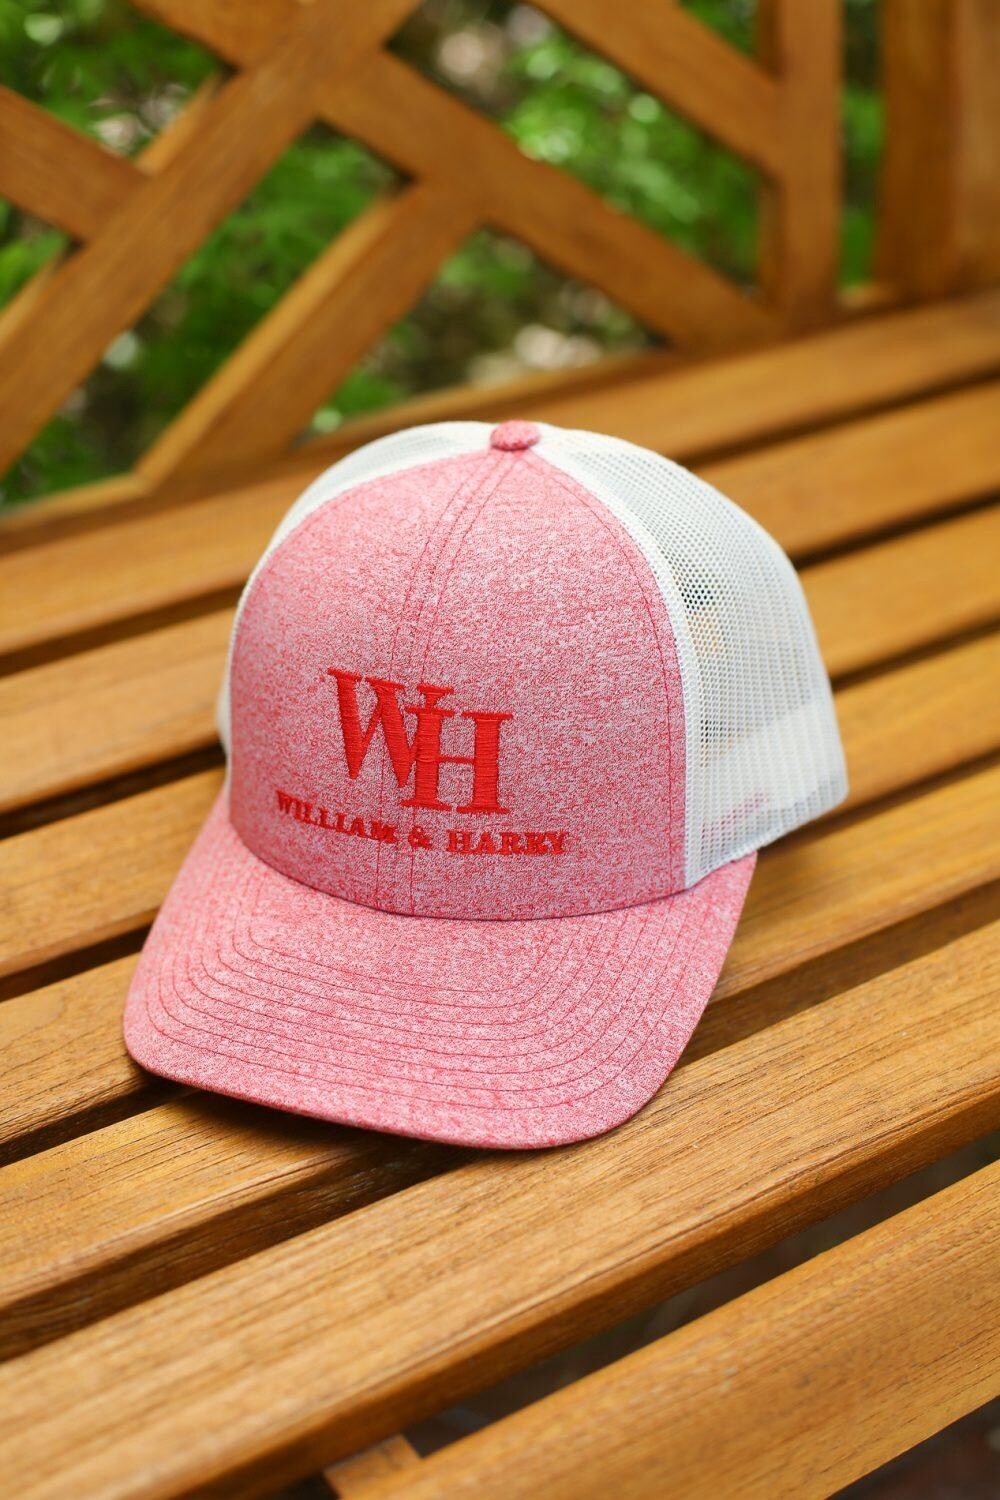 Snap fit William and Harry baseball cap